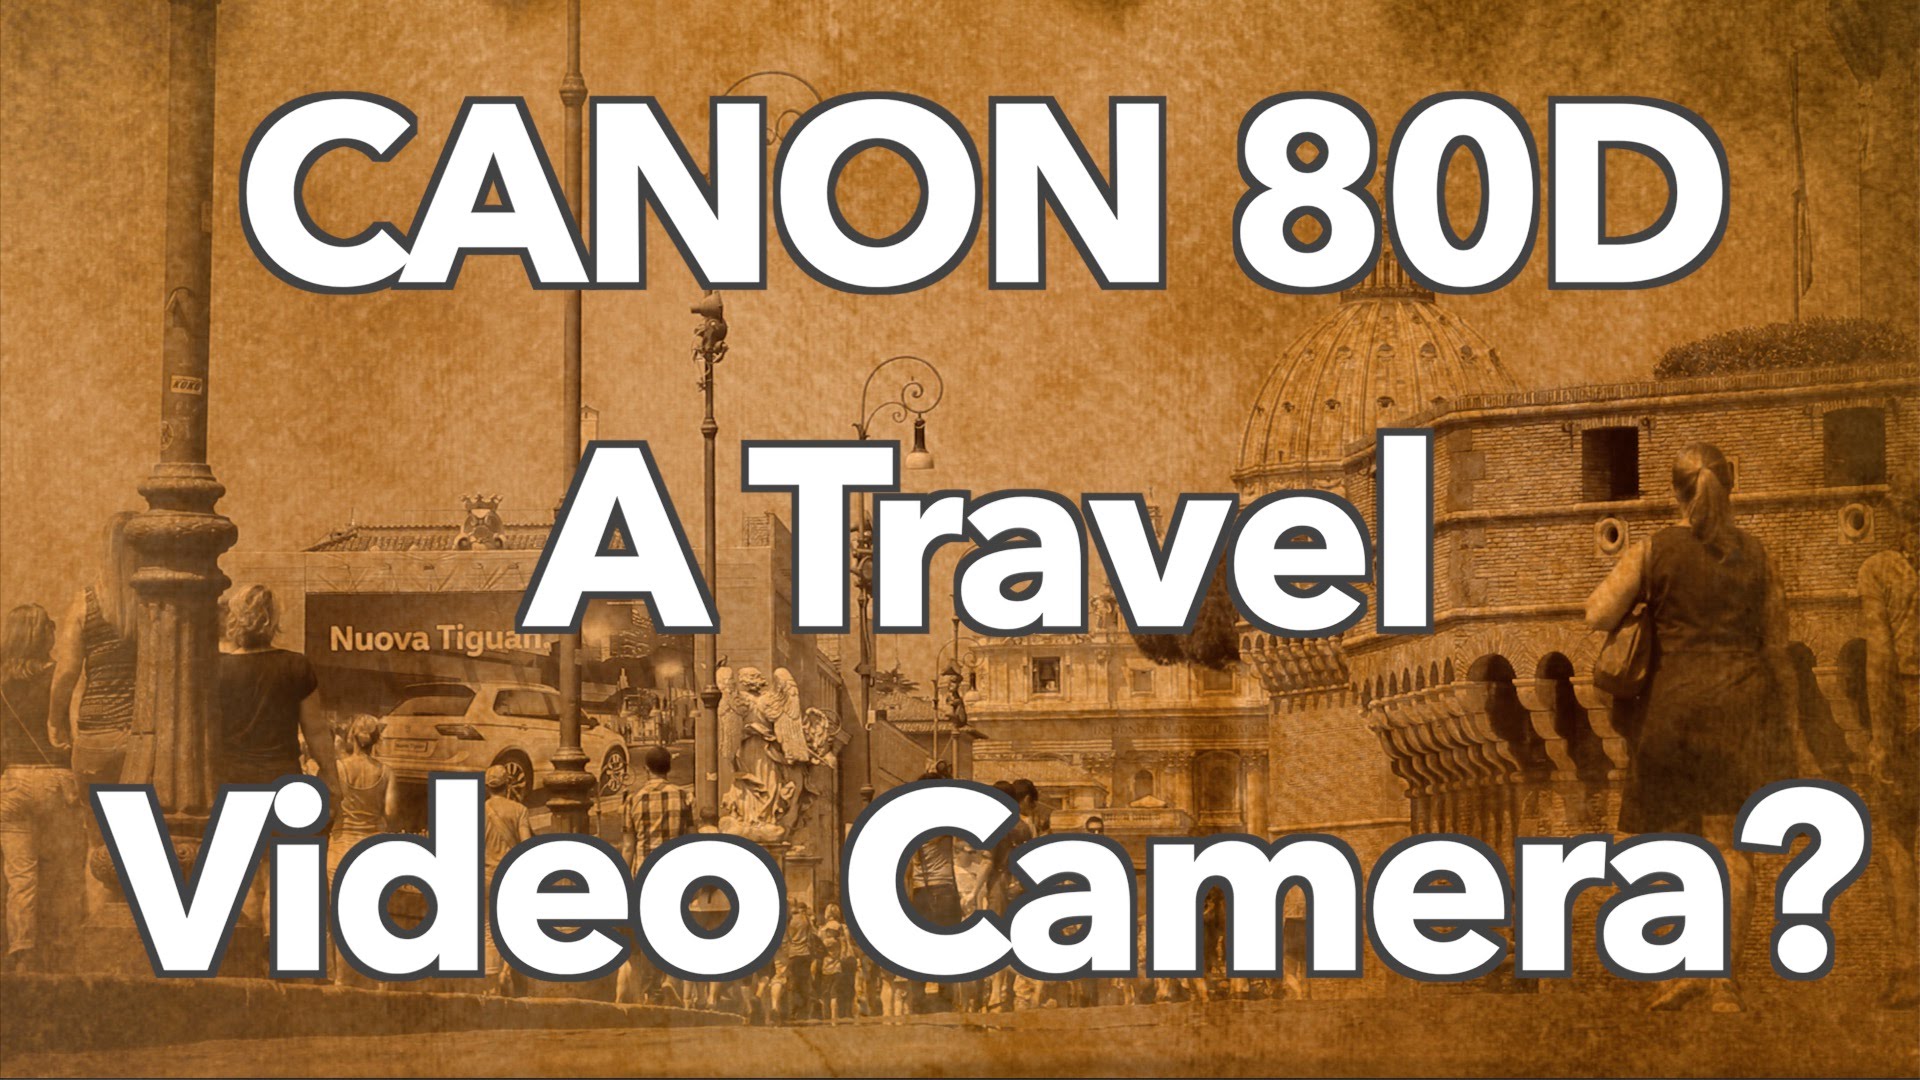 The Canon 80D – A Good Travel Video Camera?